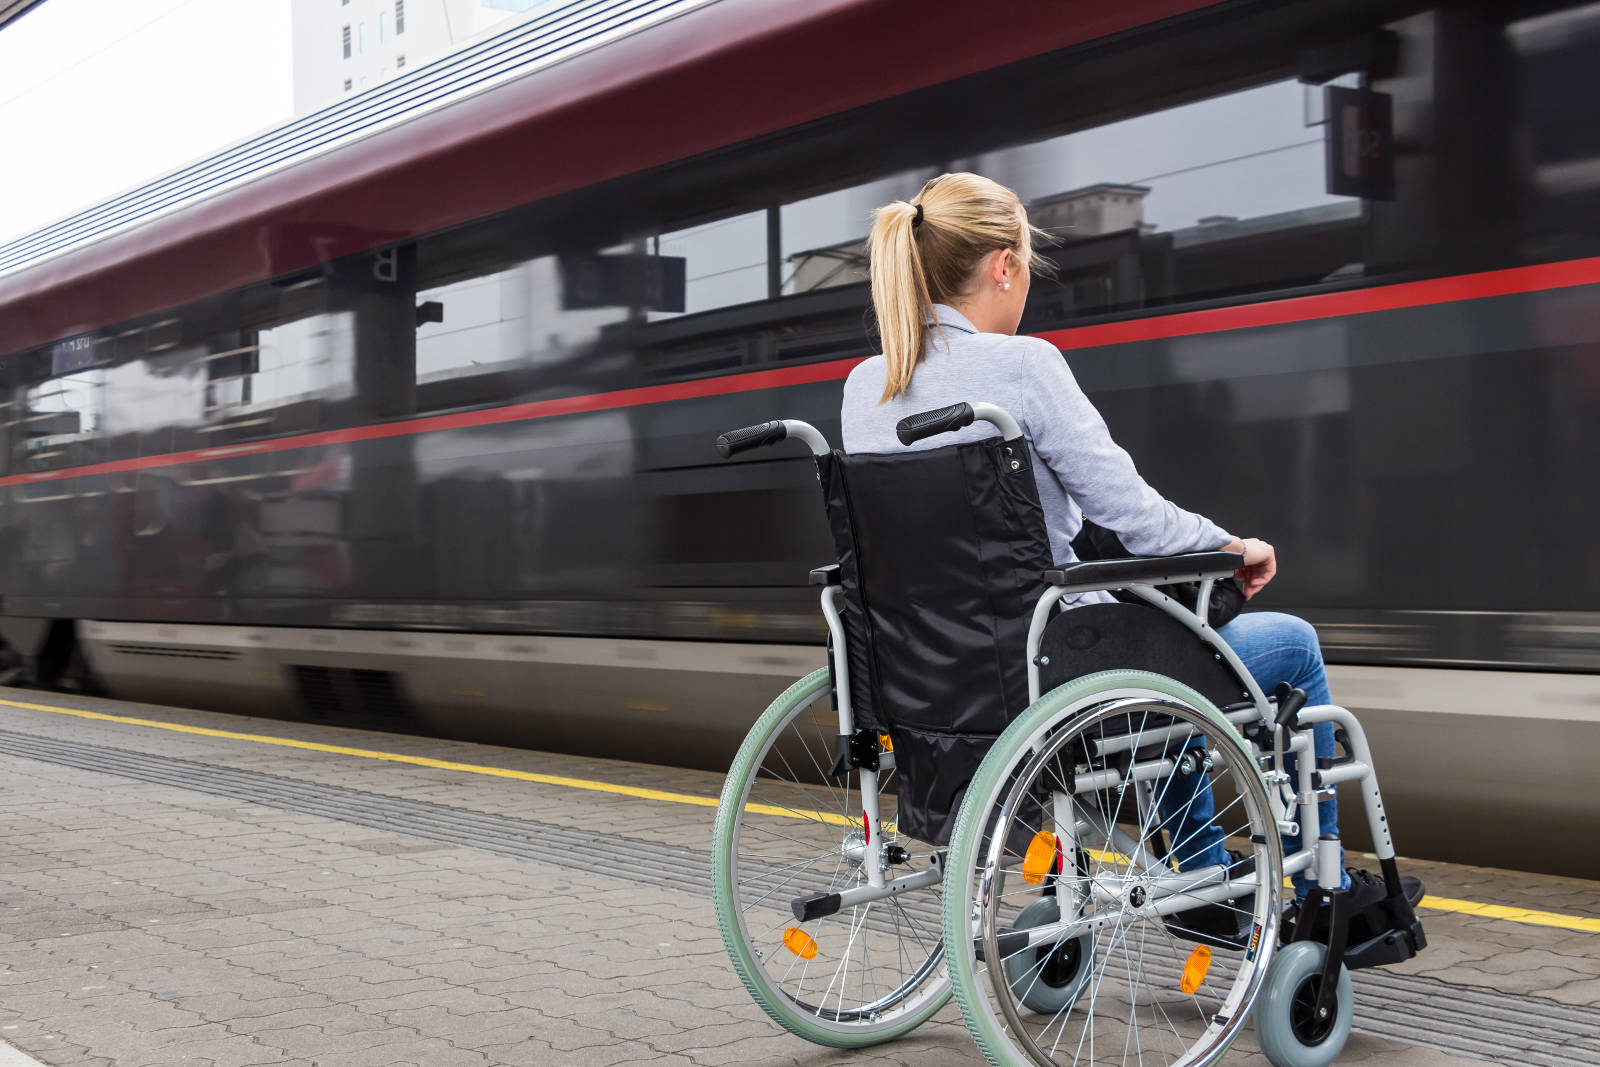 Enable iD ‘Accessibility Hub’ Concept Approved by UK Train Operators